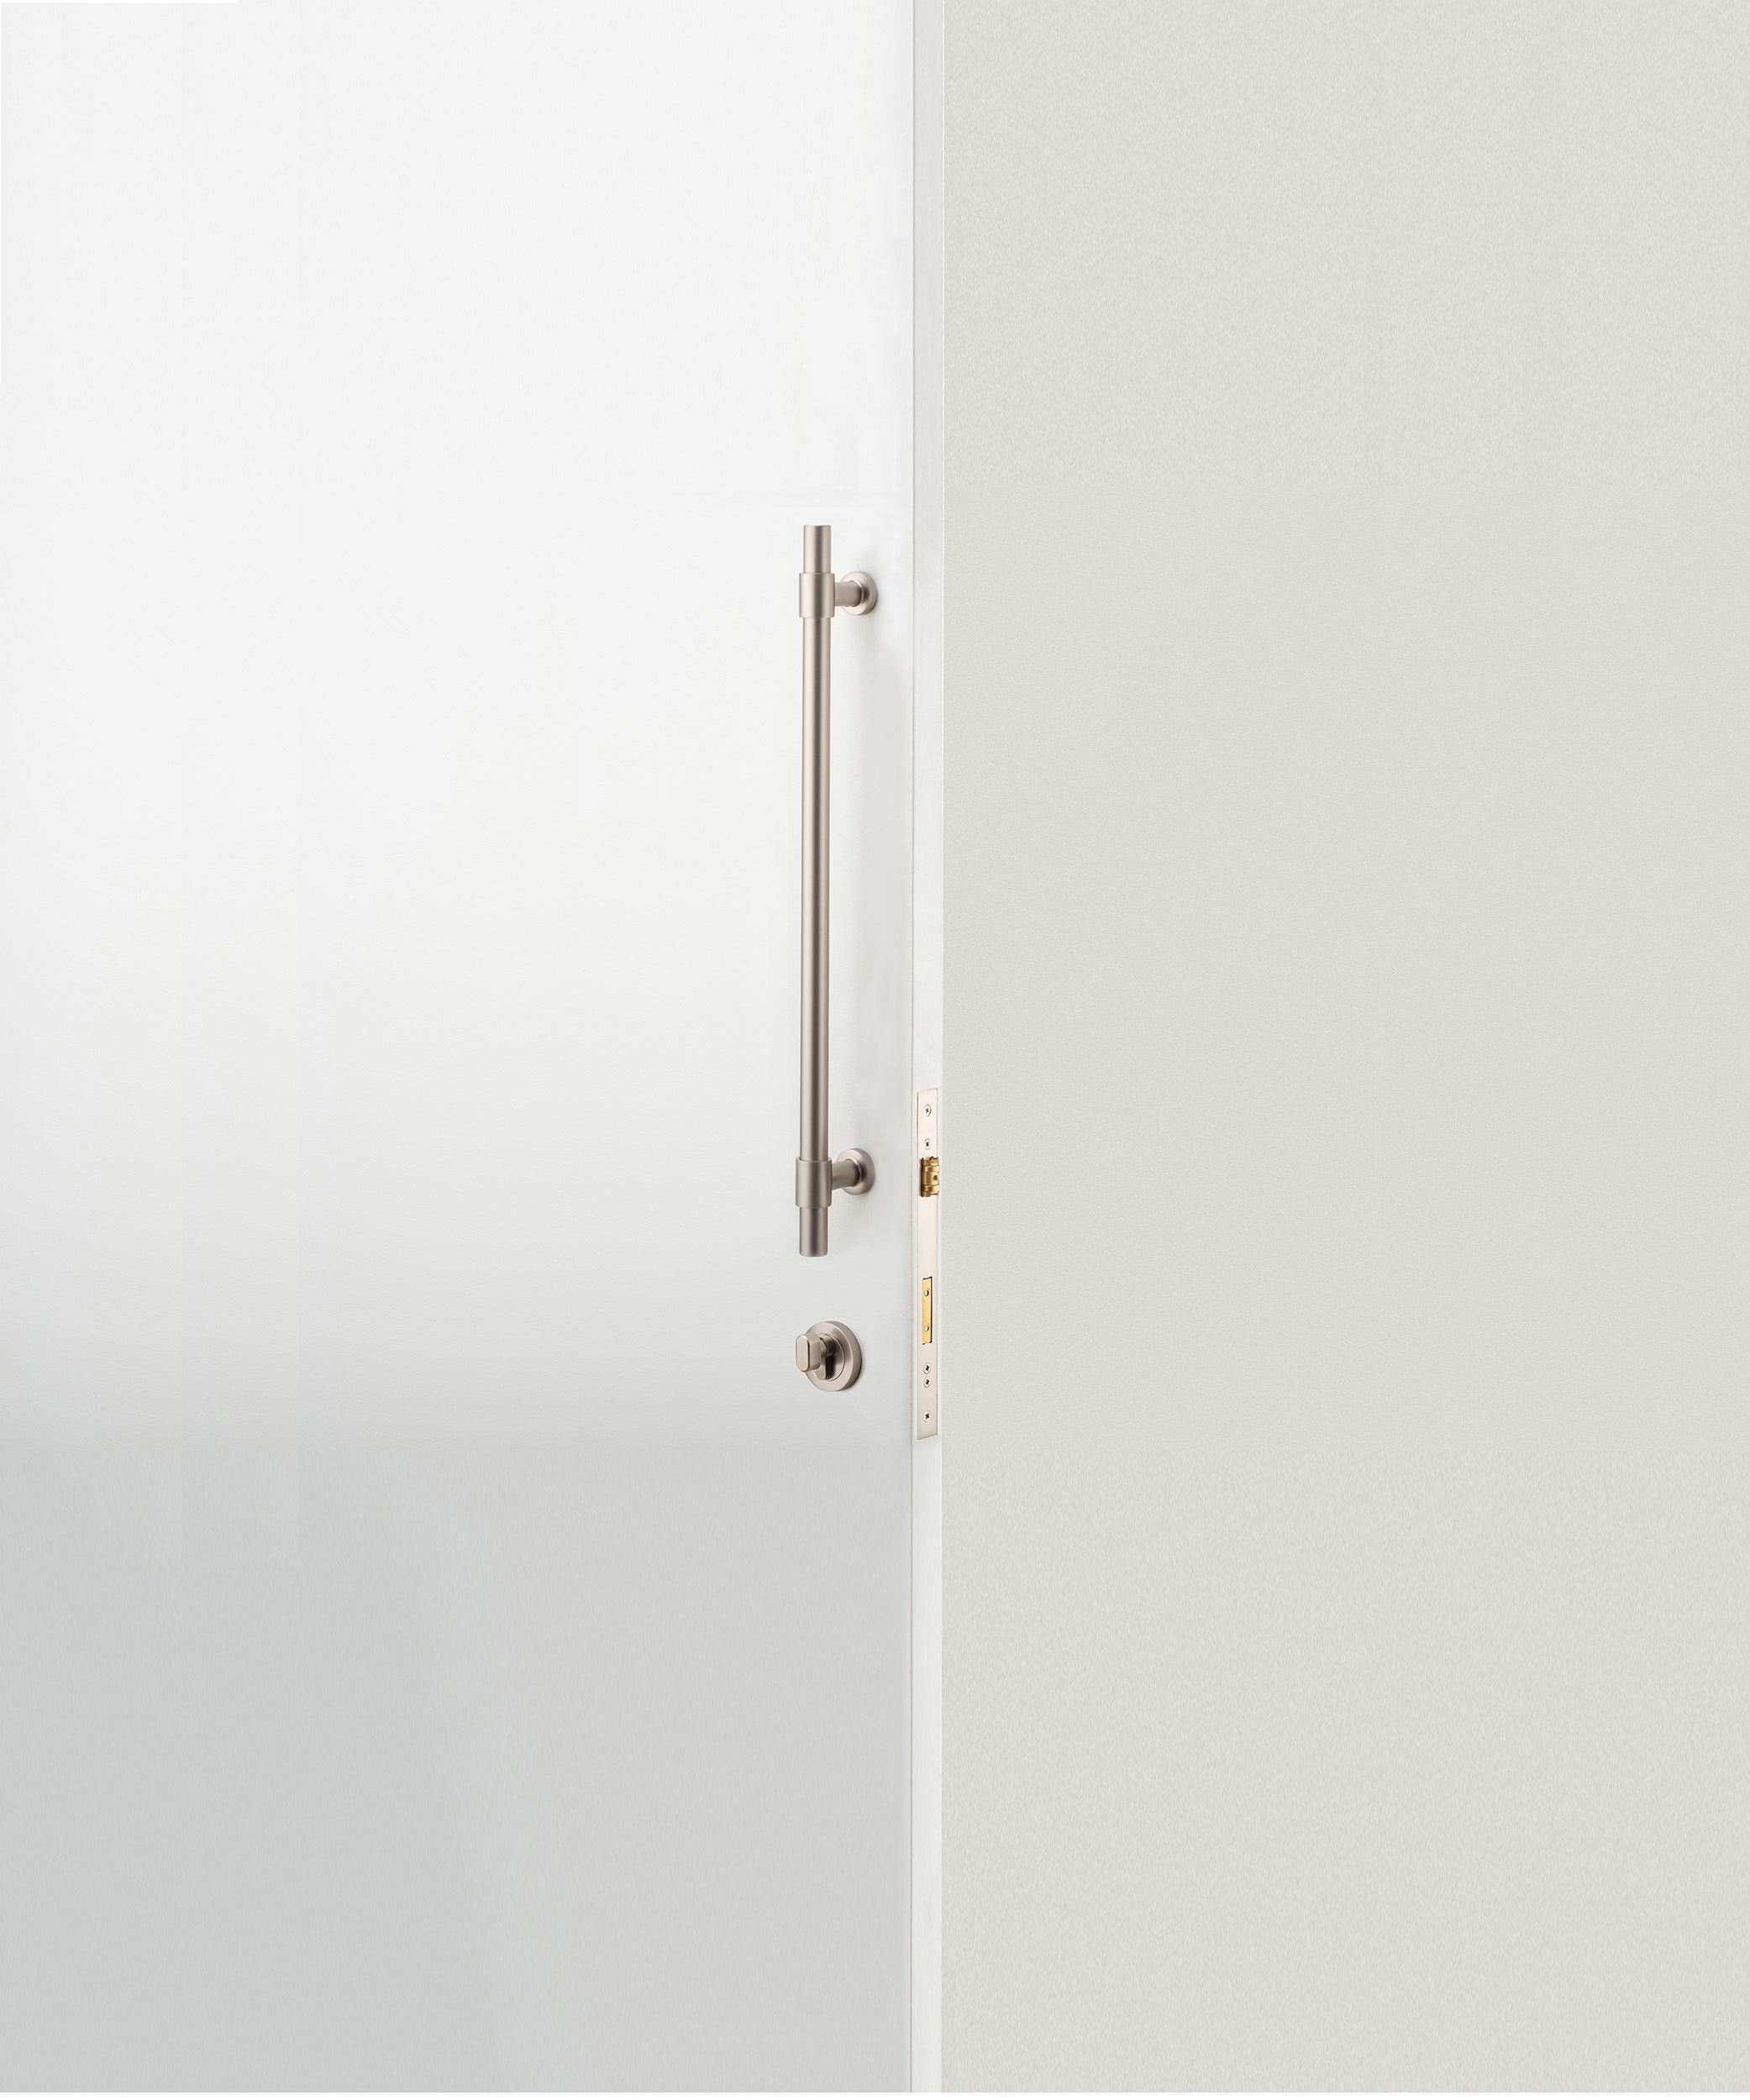 9449KENTR60KT - Berlin Pull Handle - 450mm Entrance Kit with Separate High Security Lock - Satin Nickel - Entrance